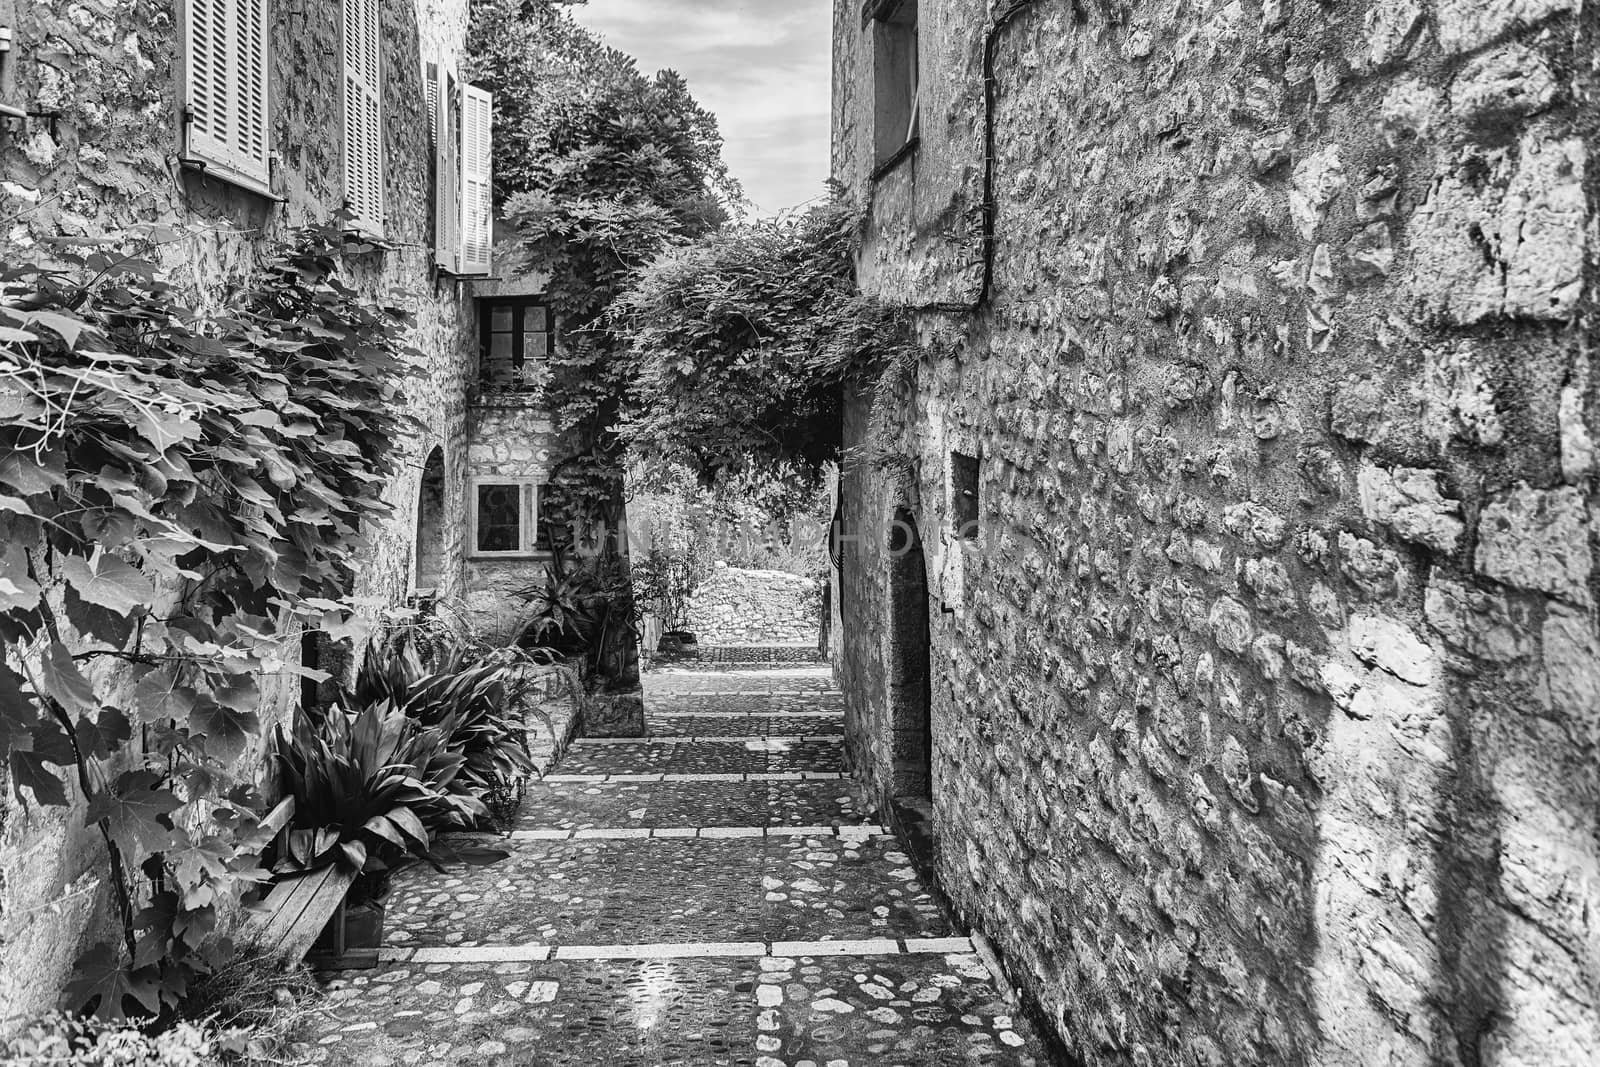 Walking in the picturesque streets of Saint-Paul-de-Vence, Cote  by marcorubino